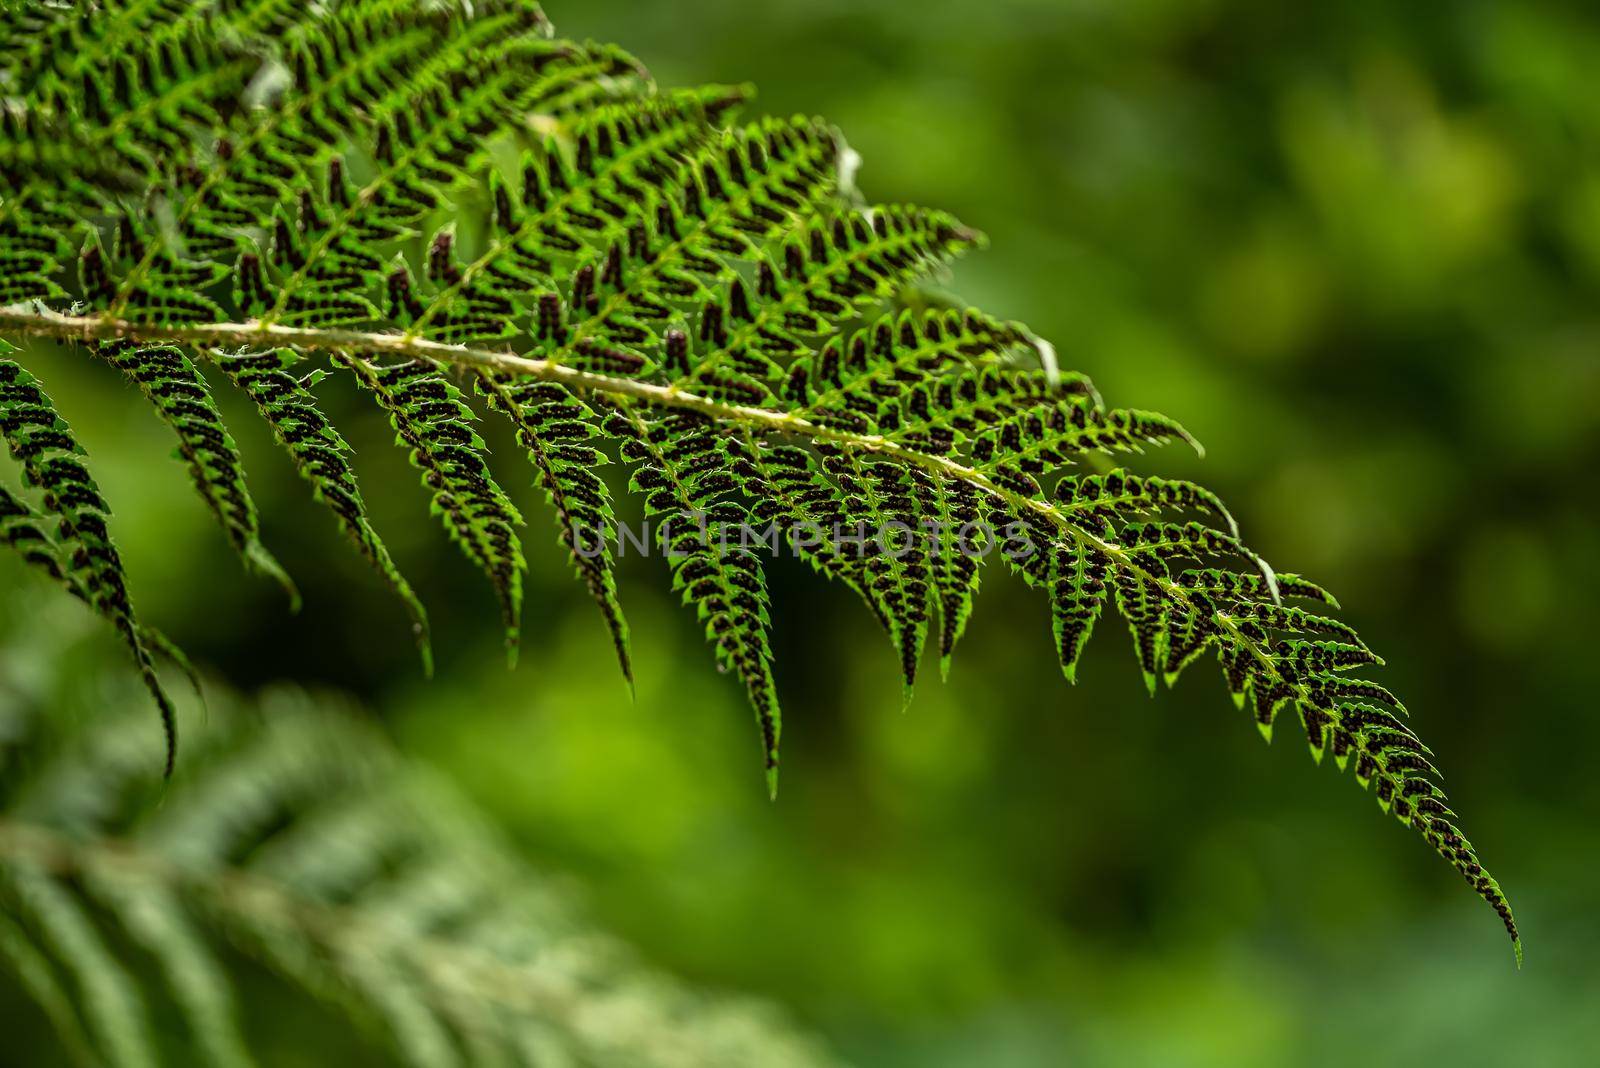 Leave of a fern in the summer green south forest